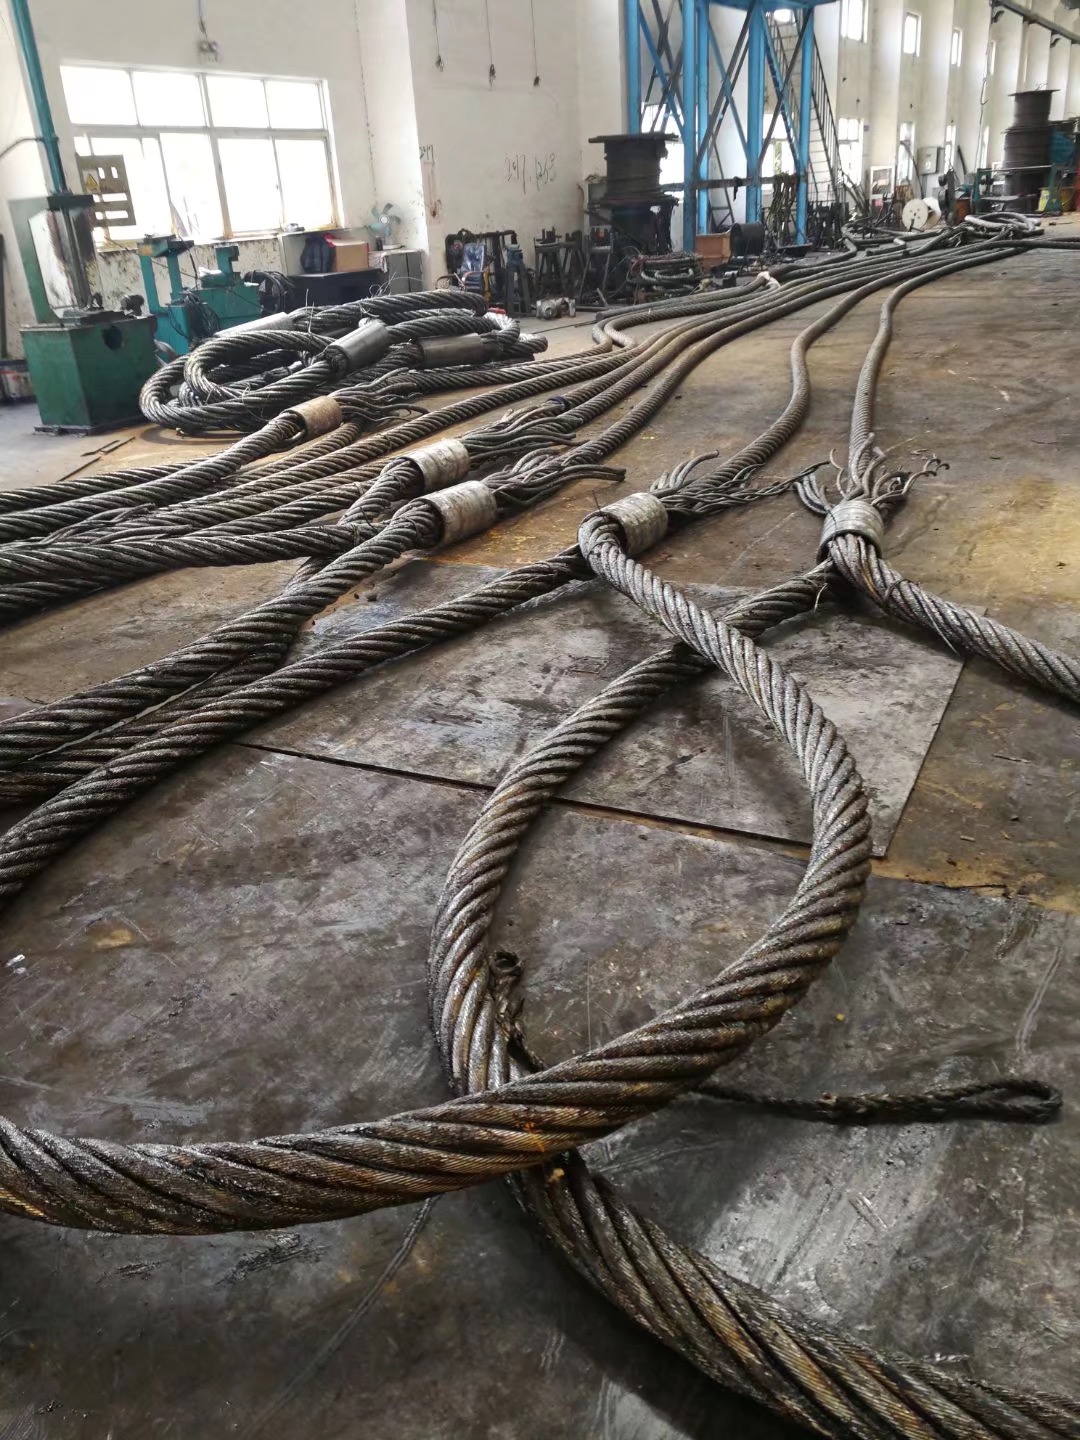 HSI 1-1/4 x 20 Three Leg Wire Rope Sling 38 Ton Vertical Rated Capacity Thimble-to-Bolt Anchor Shackle EIPS 6x37 IWRC 2-1/4 Oblong Master Link 